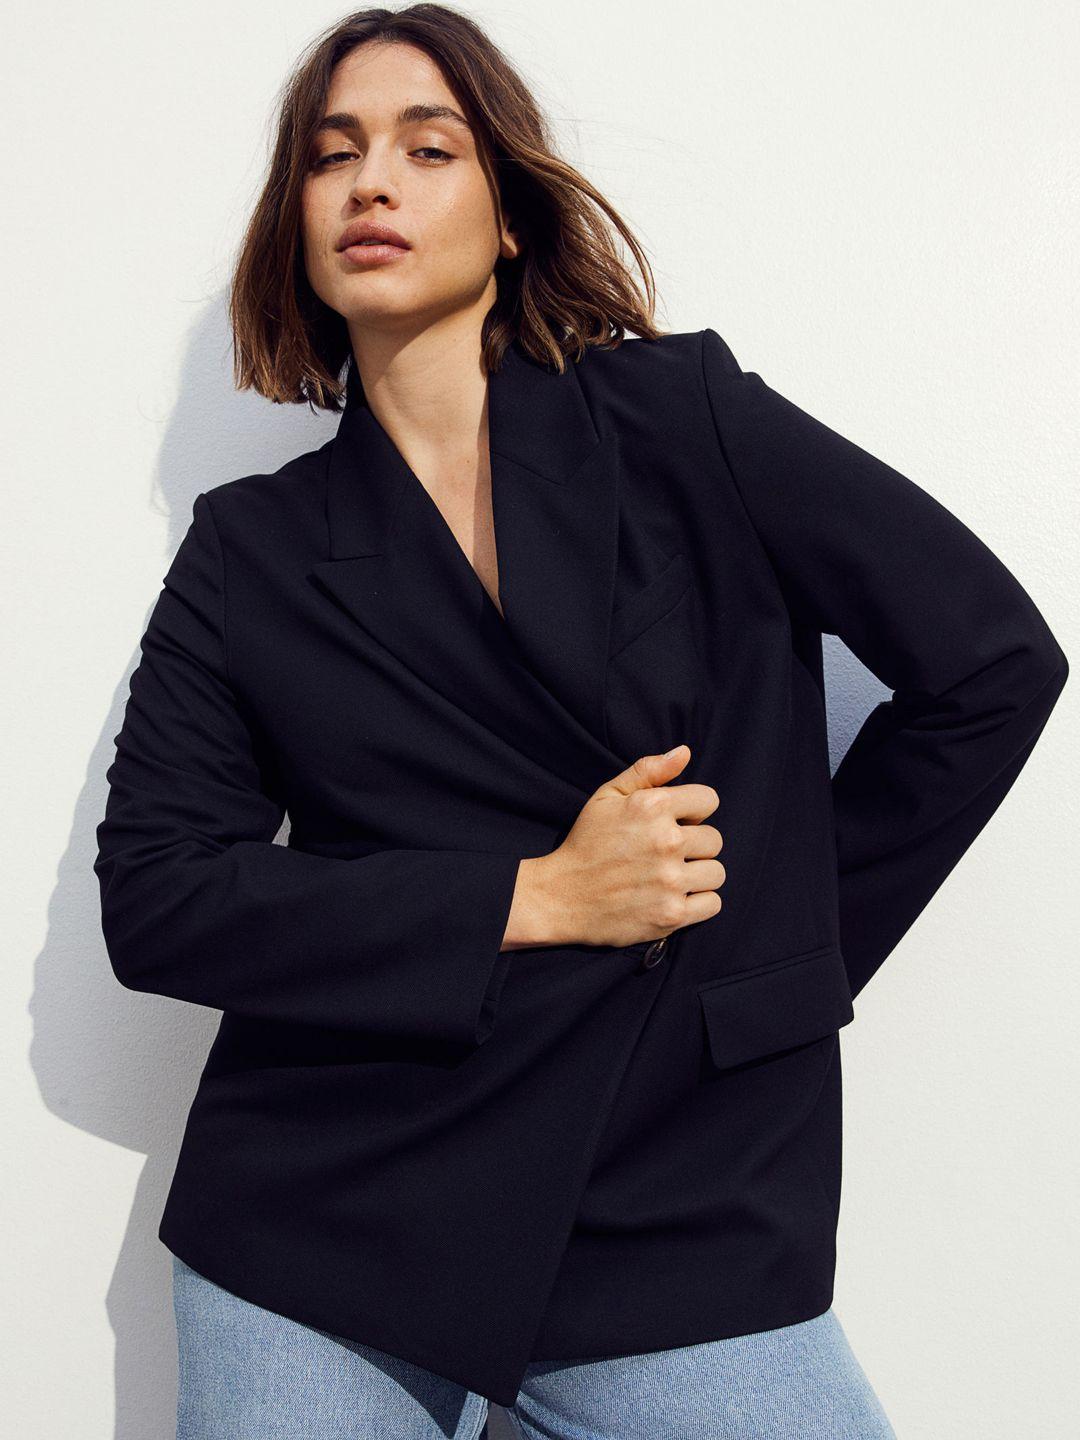 h&m double-breasted blazer